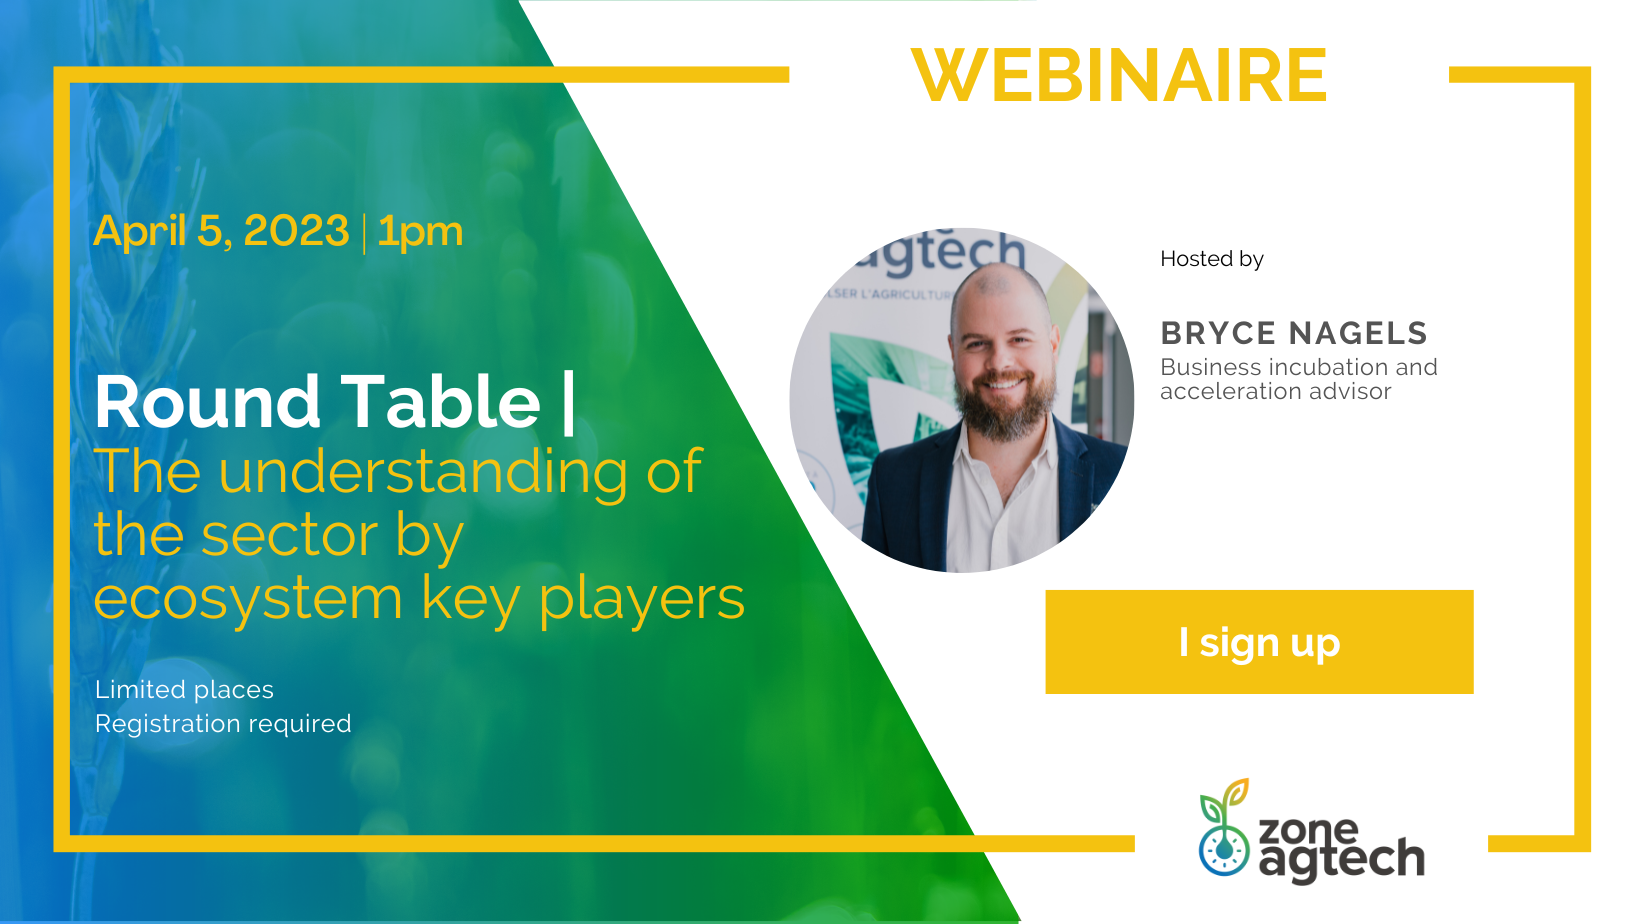 Round Table | The understanding of the sector by ecosystem key players